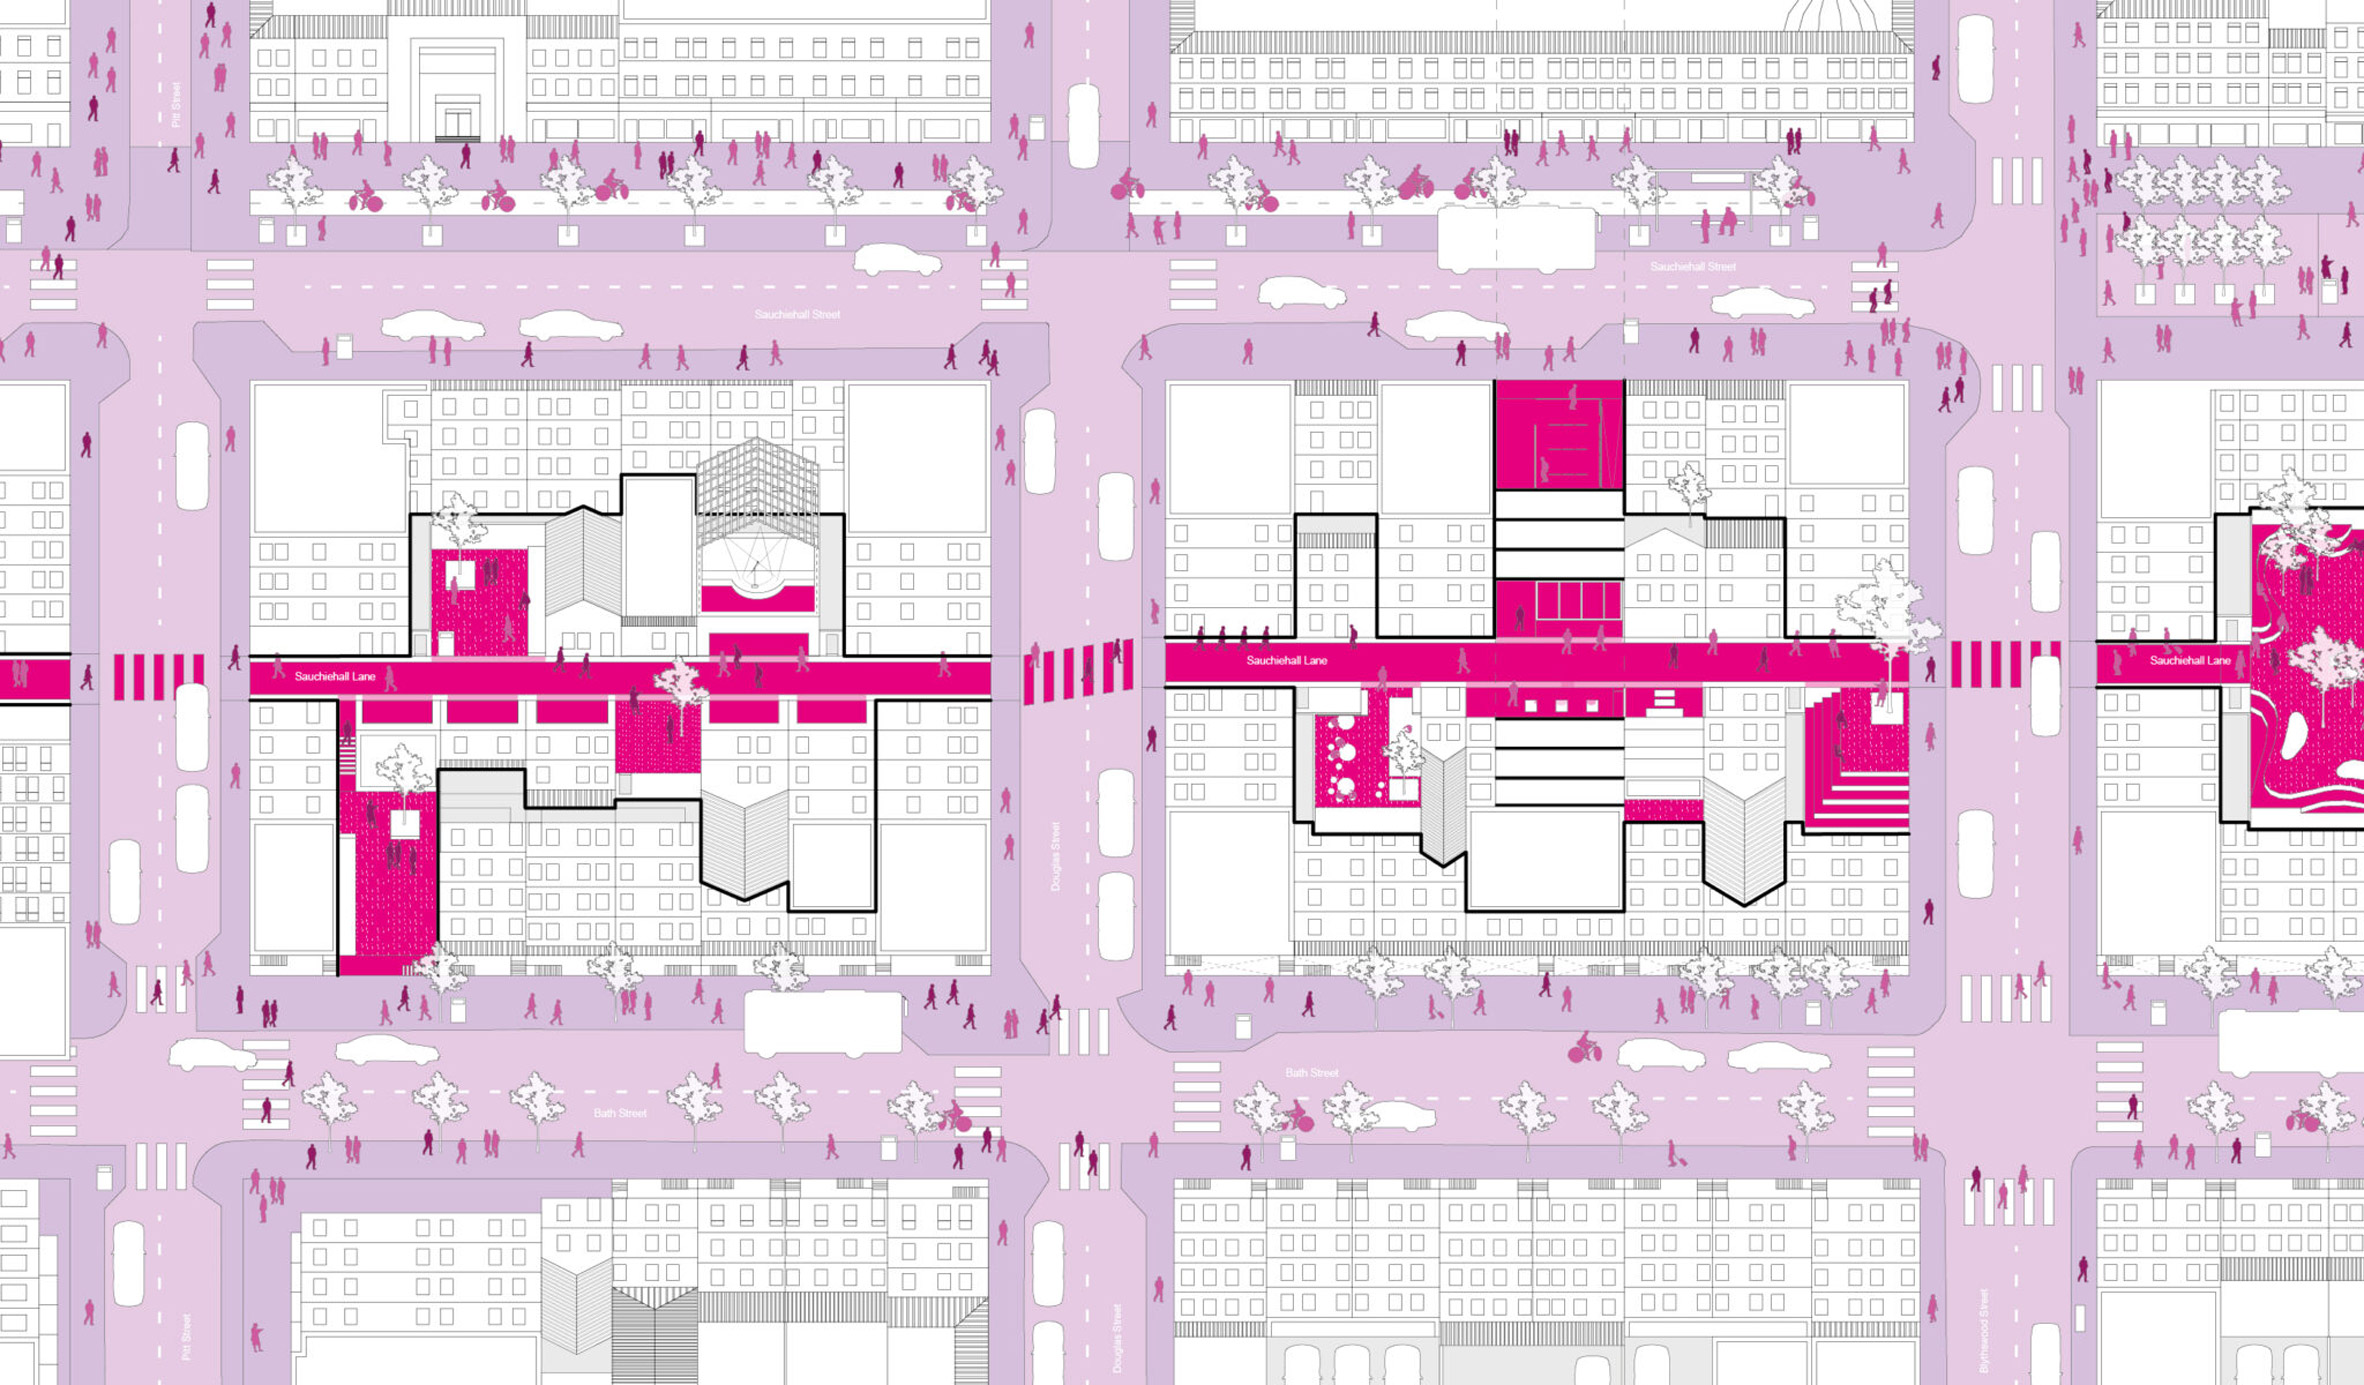 Pink and white grid city plan by a student at Glasgow School of Art